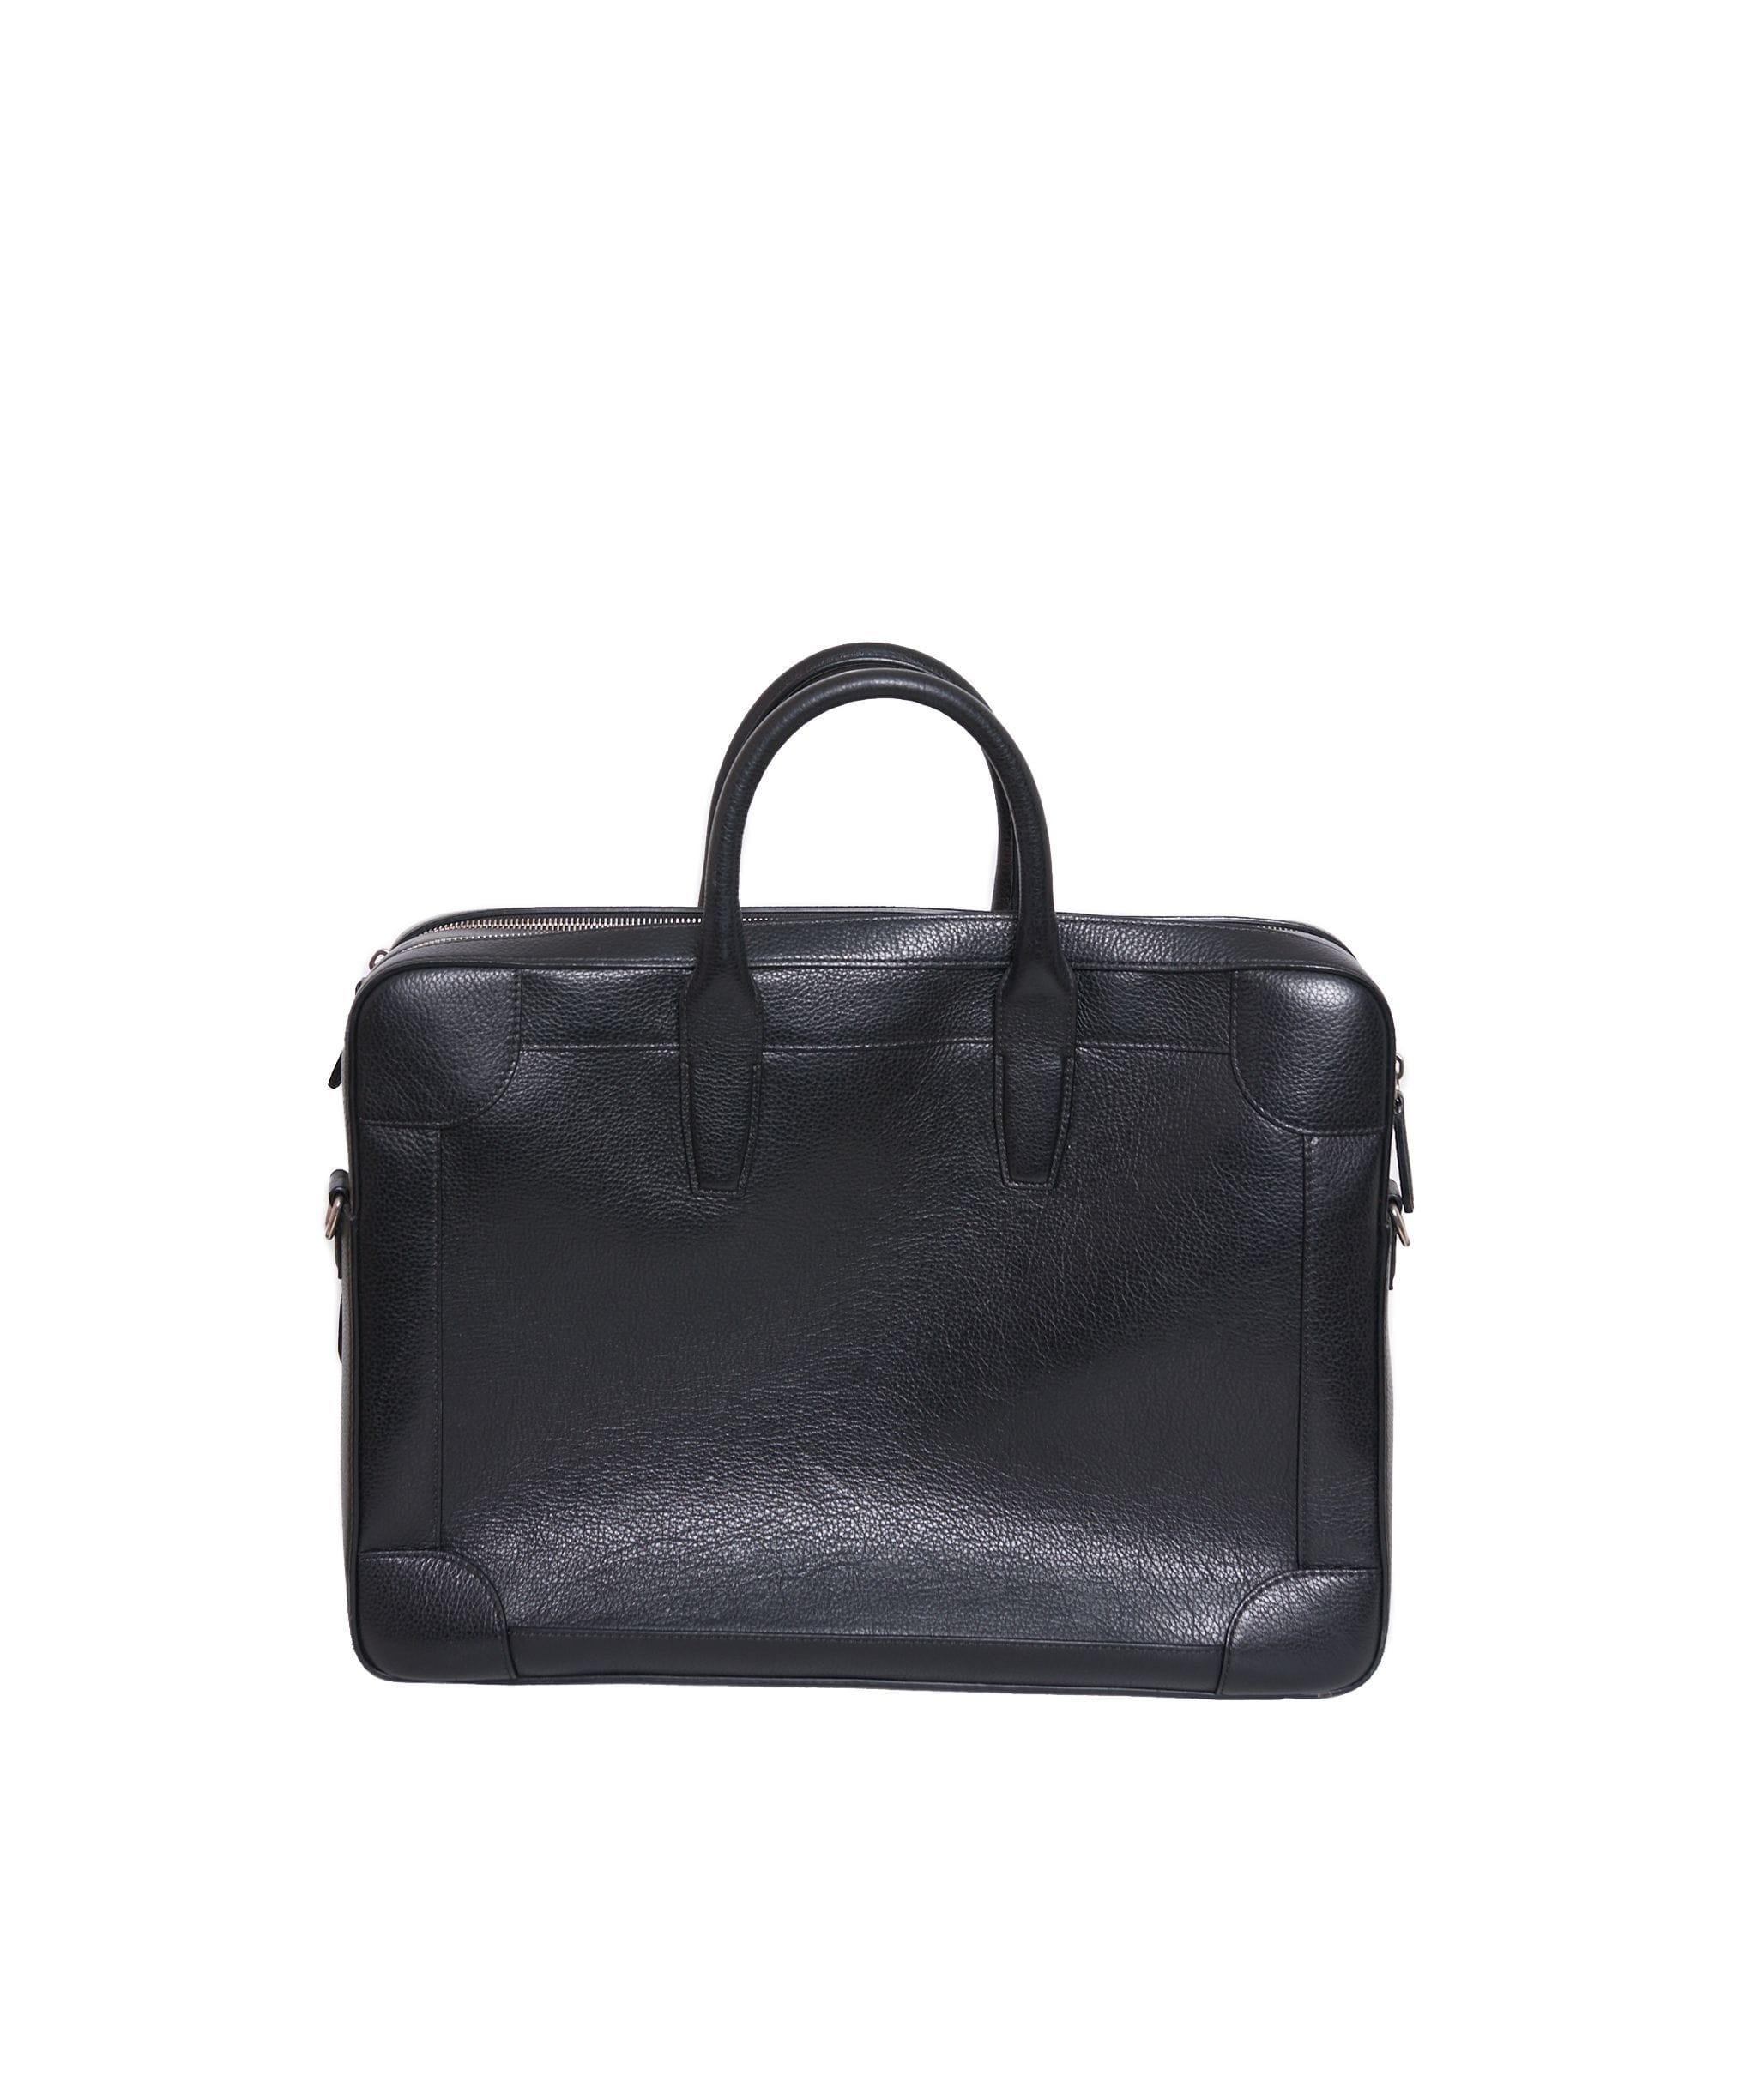 Mulberry Mulberry Mens black leather Briefcase - ASL1211